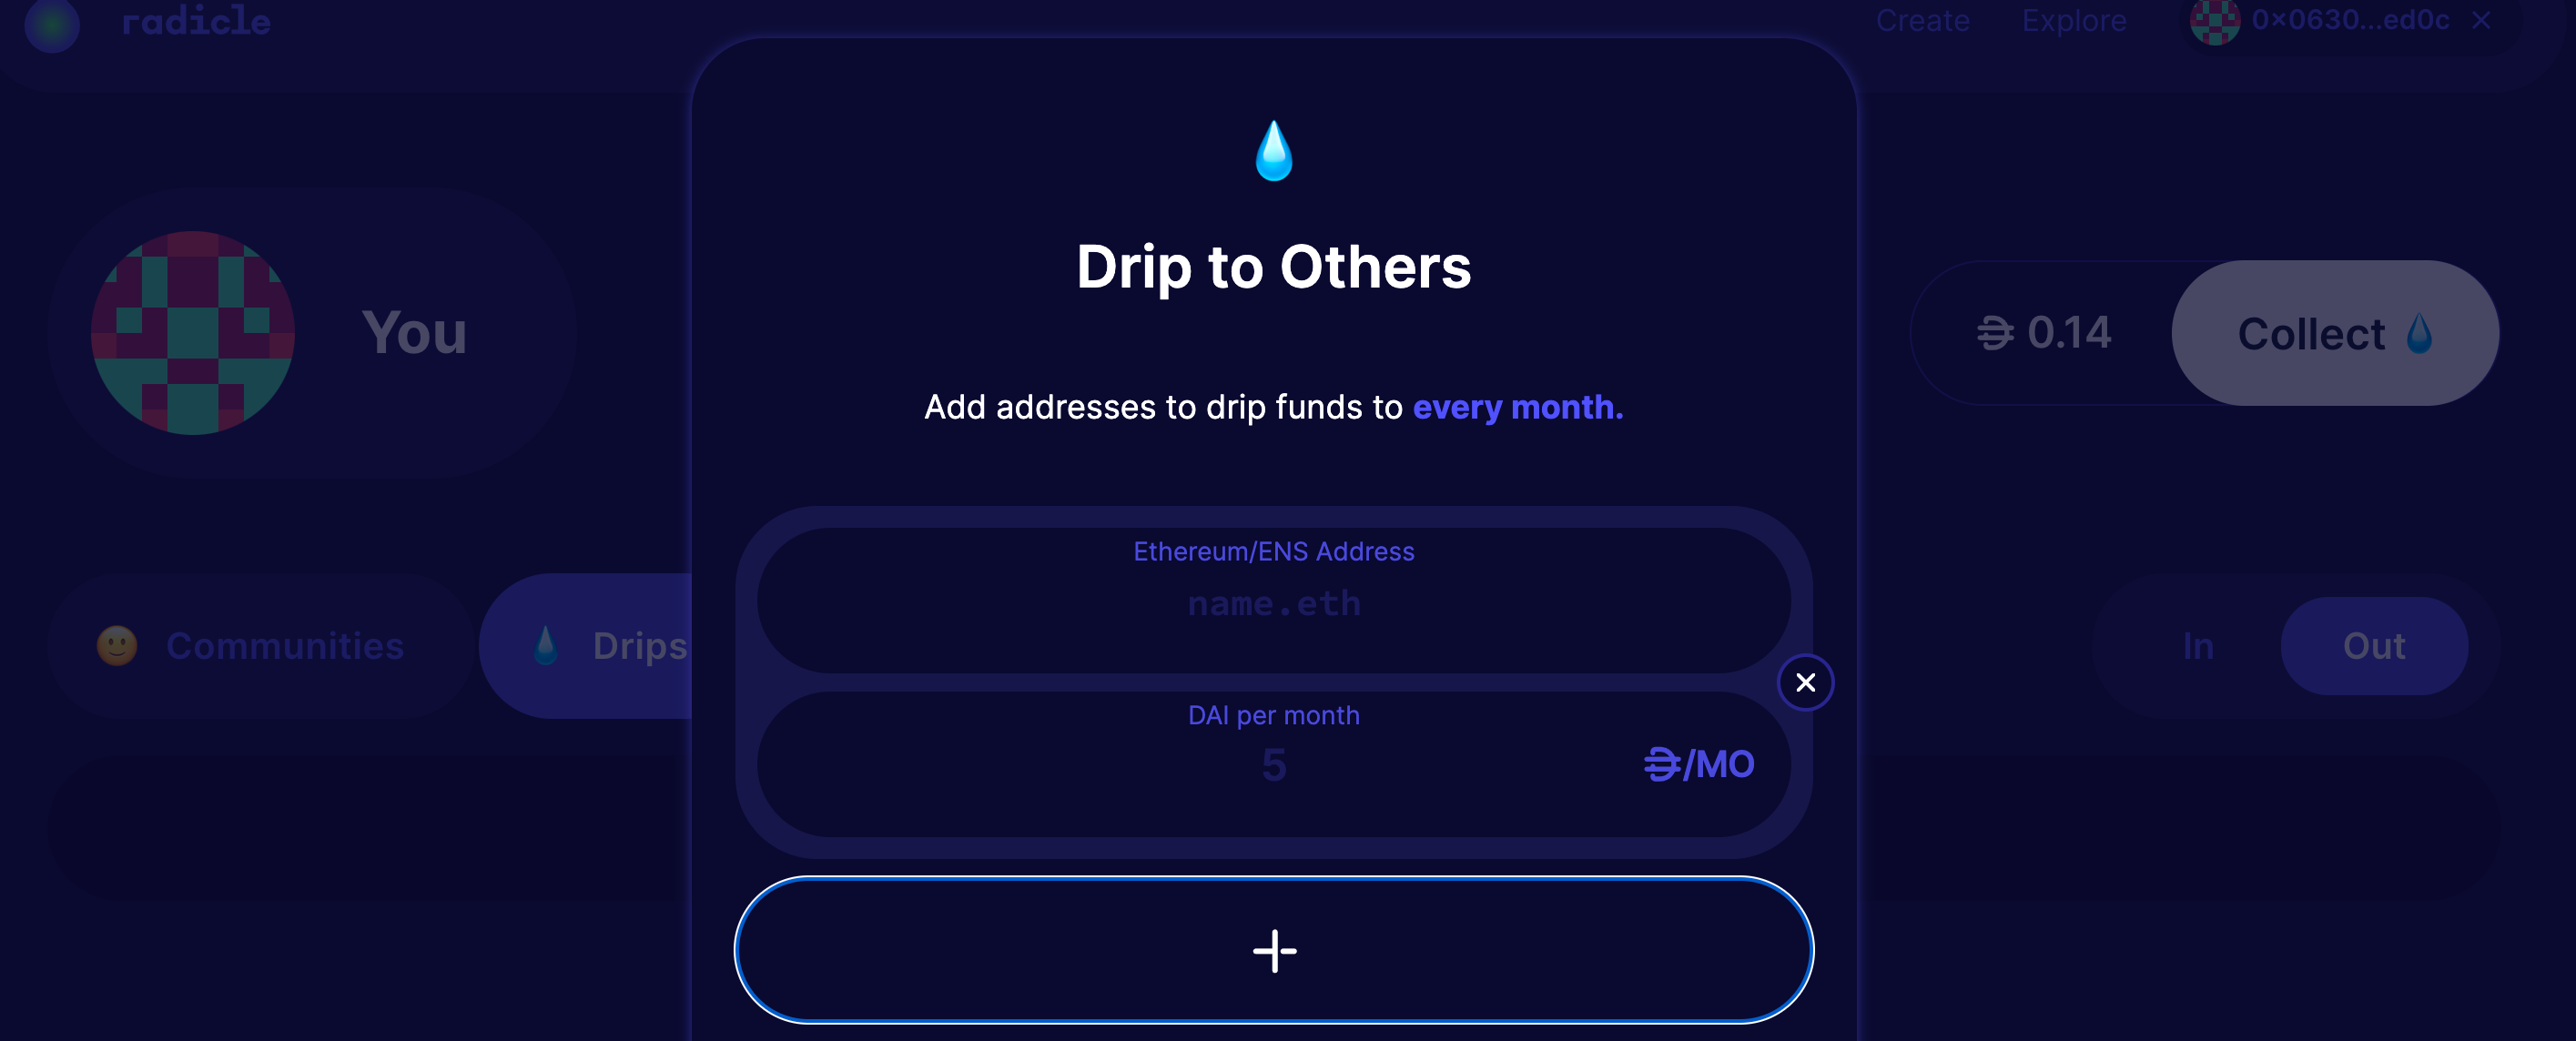 Drips Page Modal